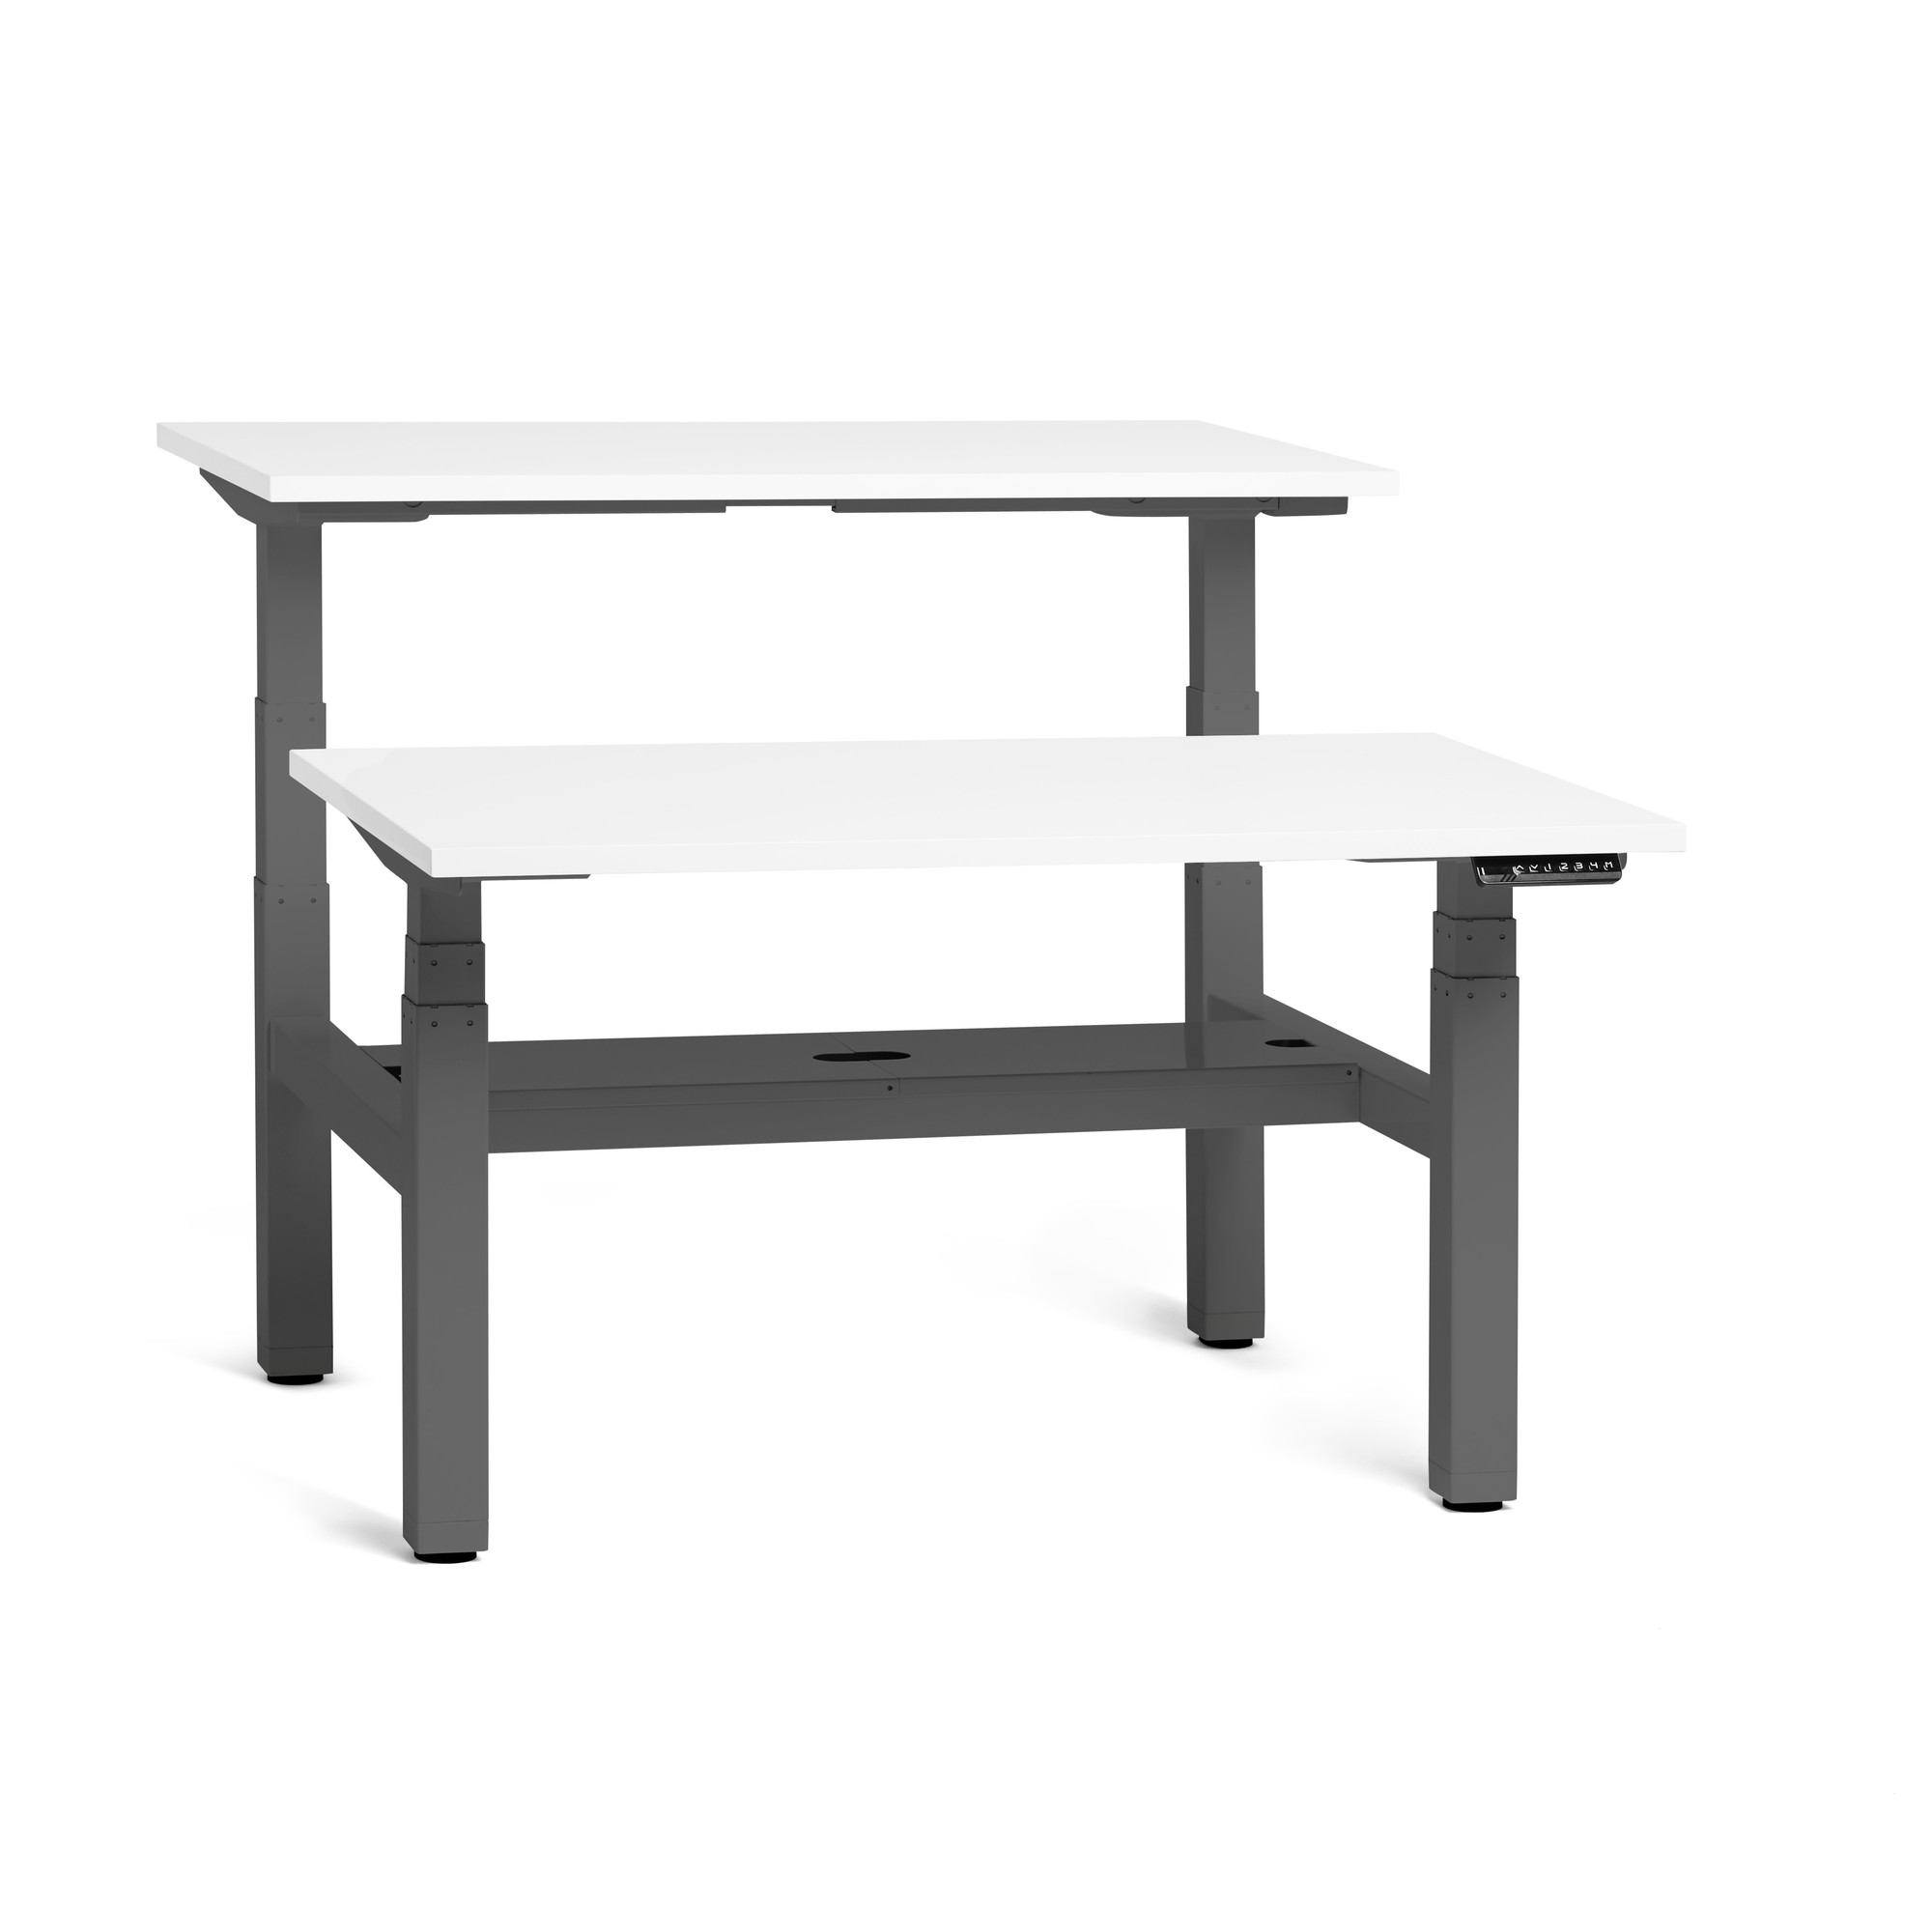 Series L Adjustable Height Double Desk For 2 Charcoal Legs